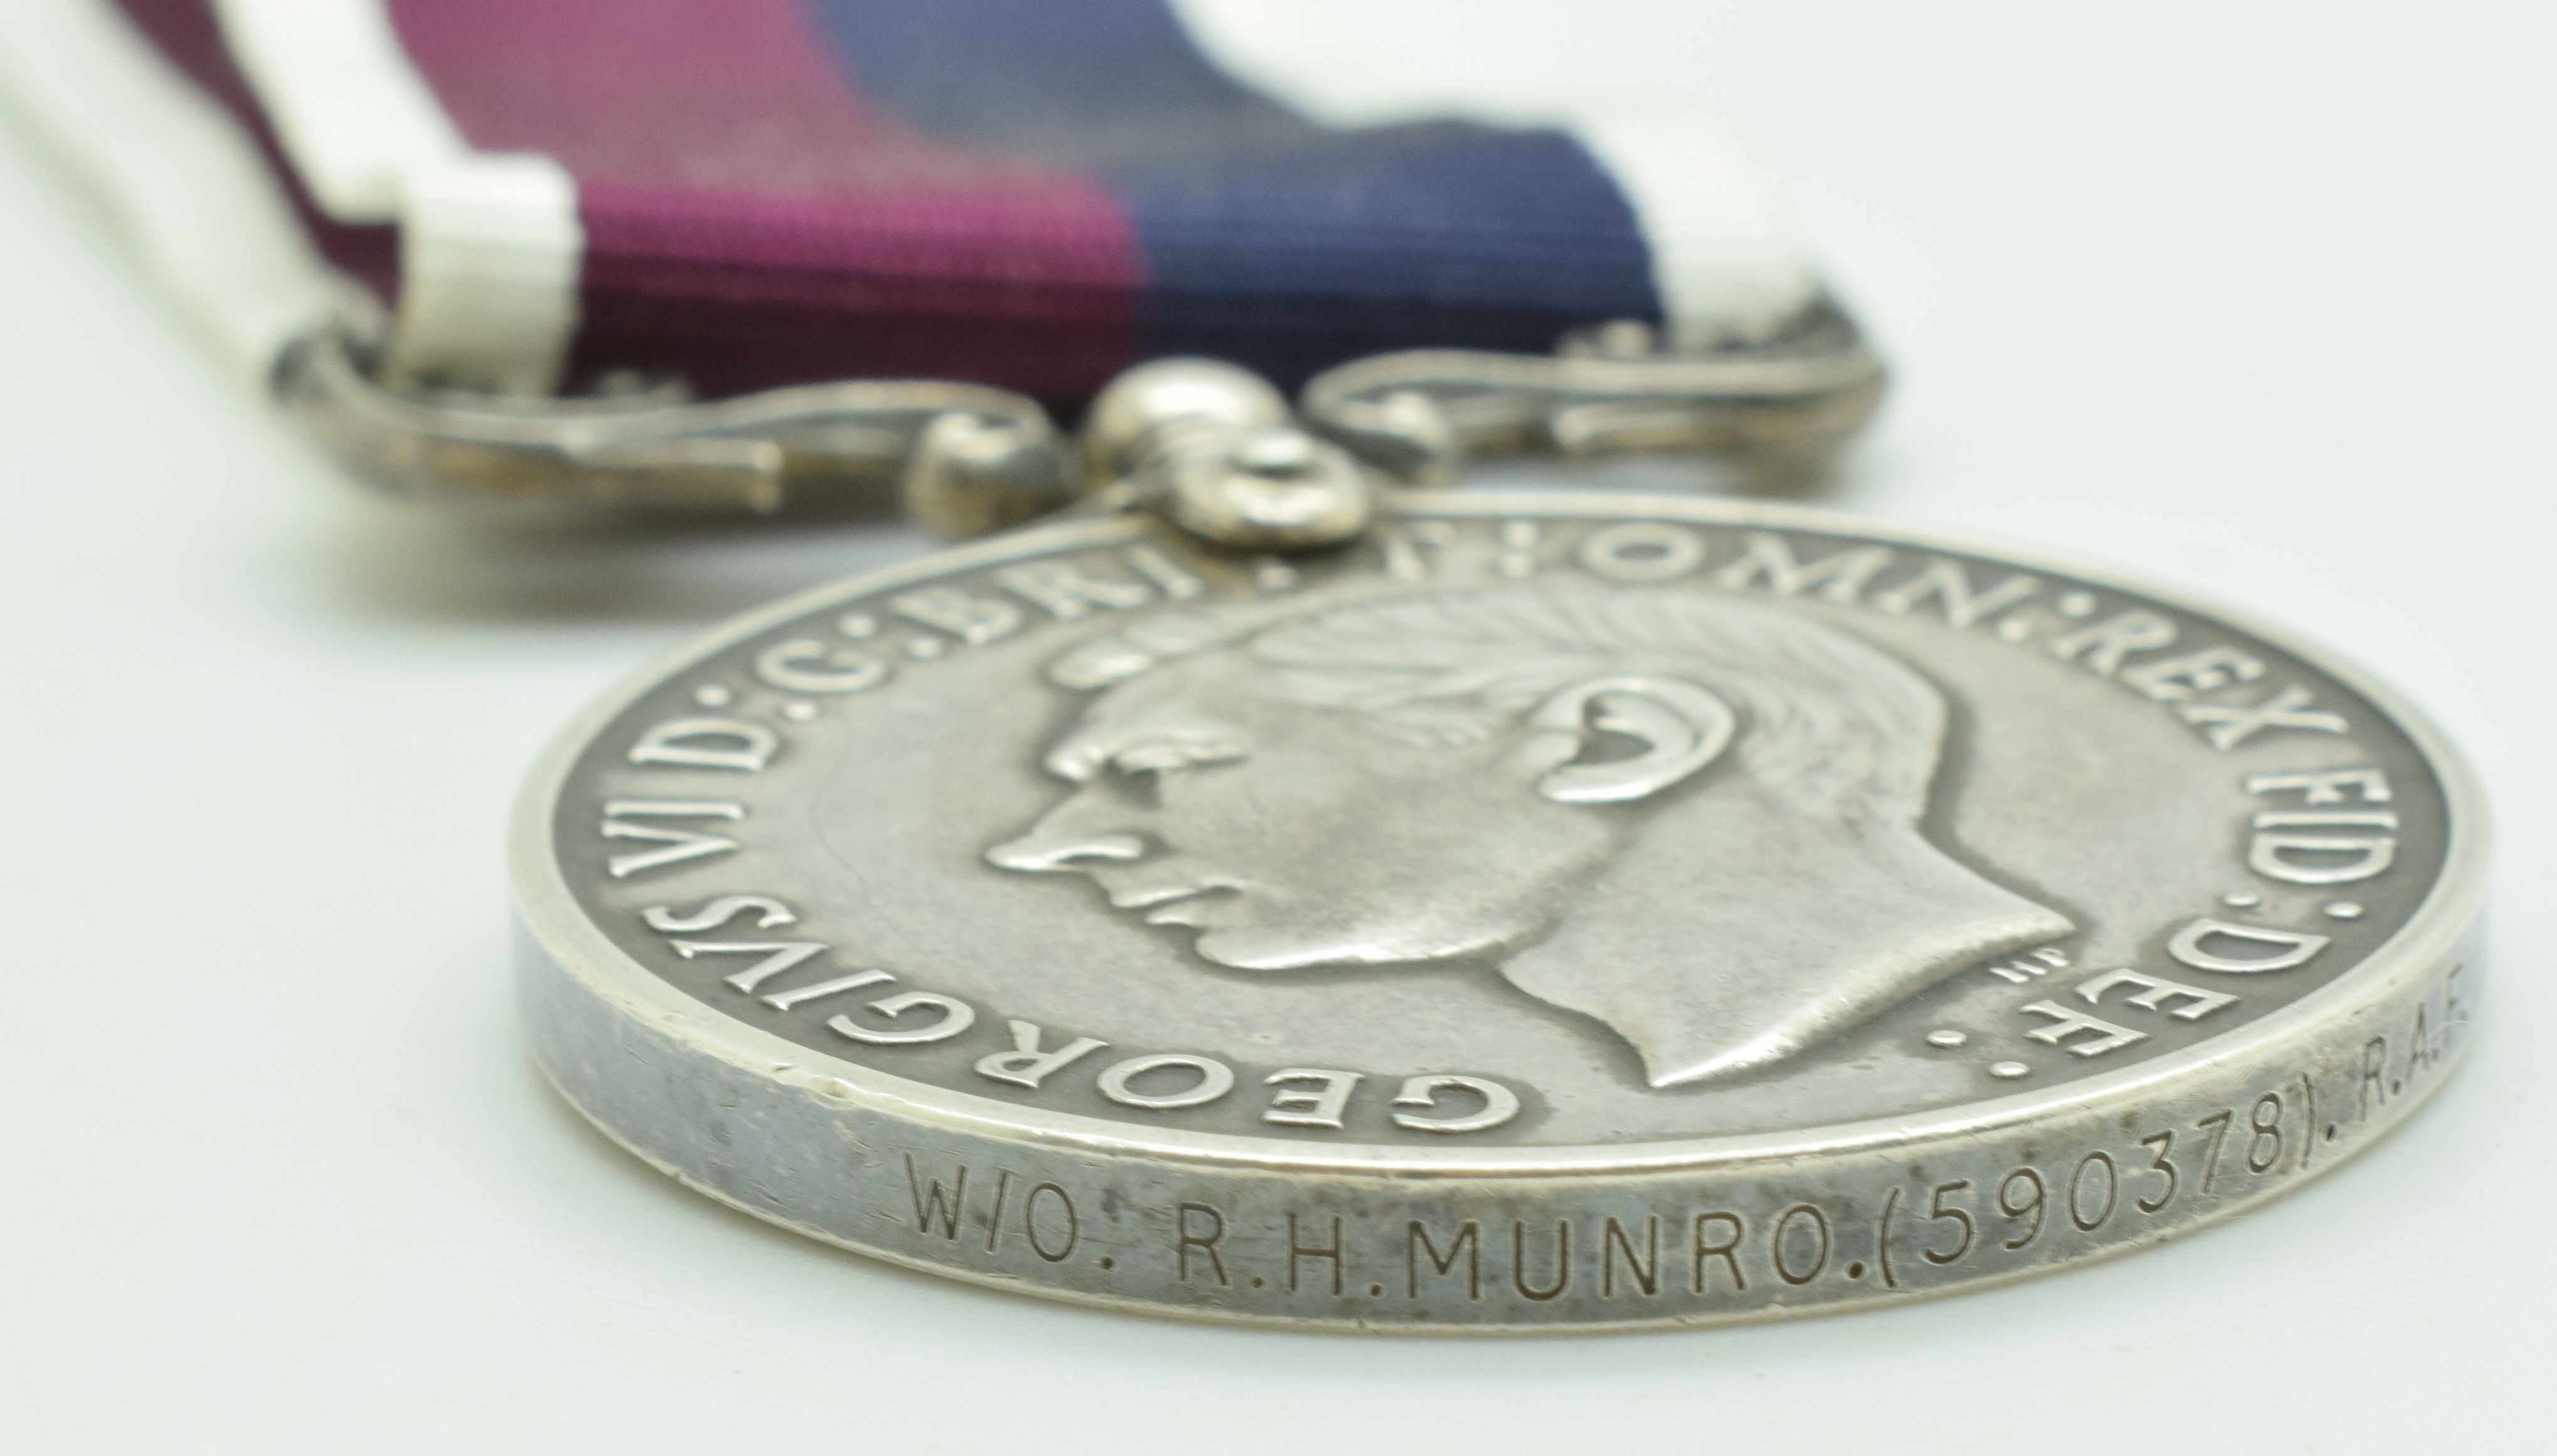 Royal Air Force Long Service and Good Conduct Medal named to Warrant Officer R H Munro 590378 RAF - Image 3 of 5